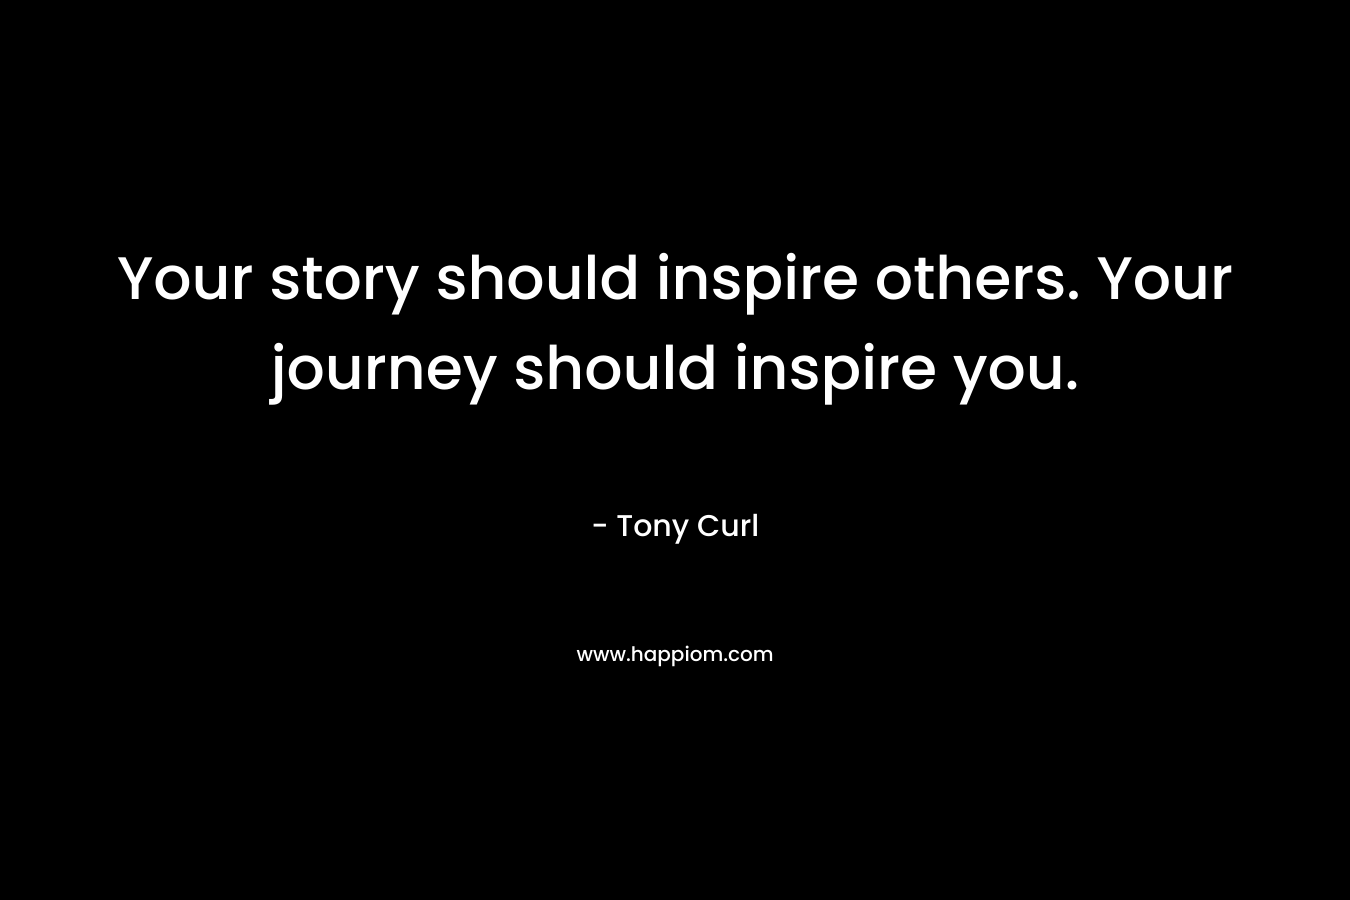 Your story should inspire others. Your journey should inspire you.